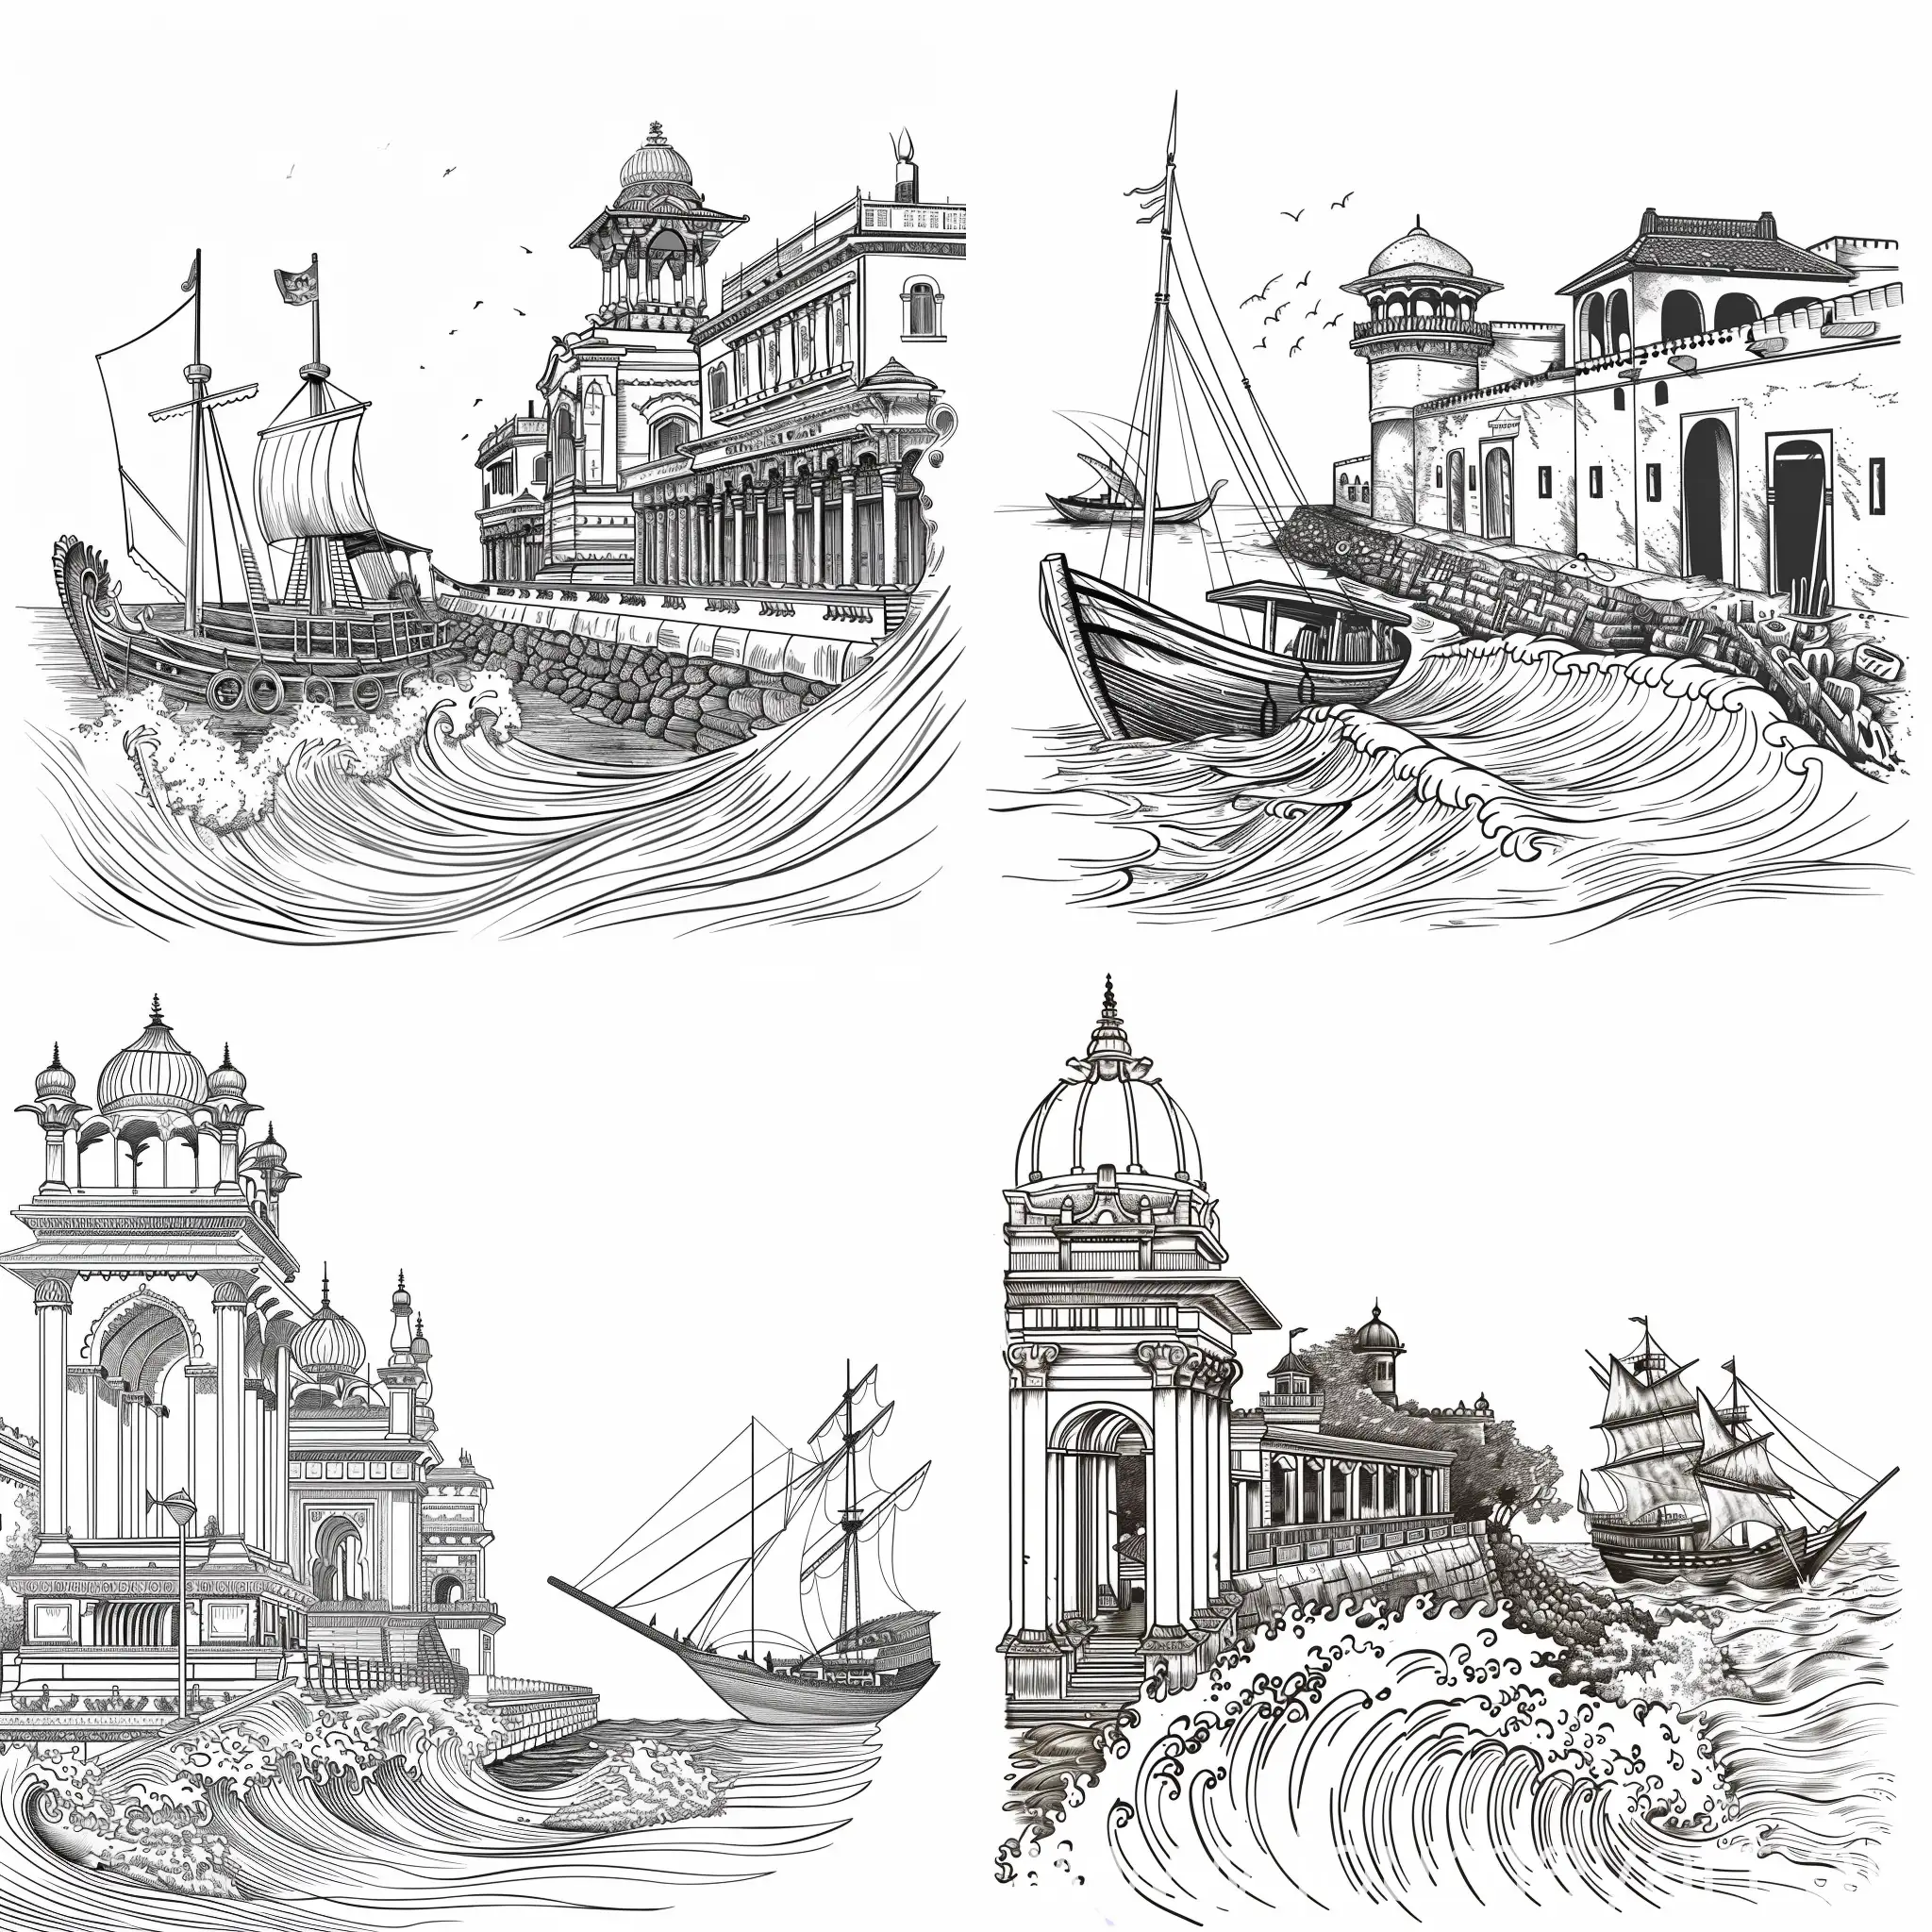 Ancient-Kerala-Harbor-Sketch-with-Detailed-Ship-and-Buildings